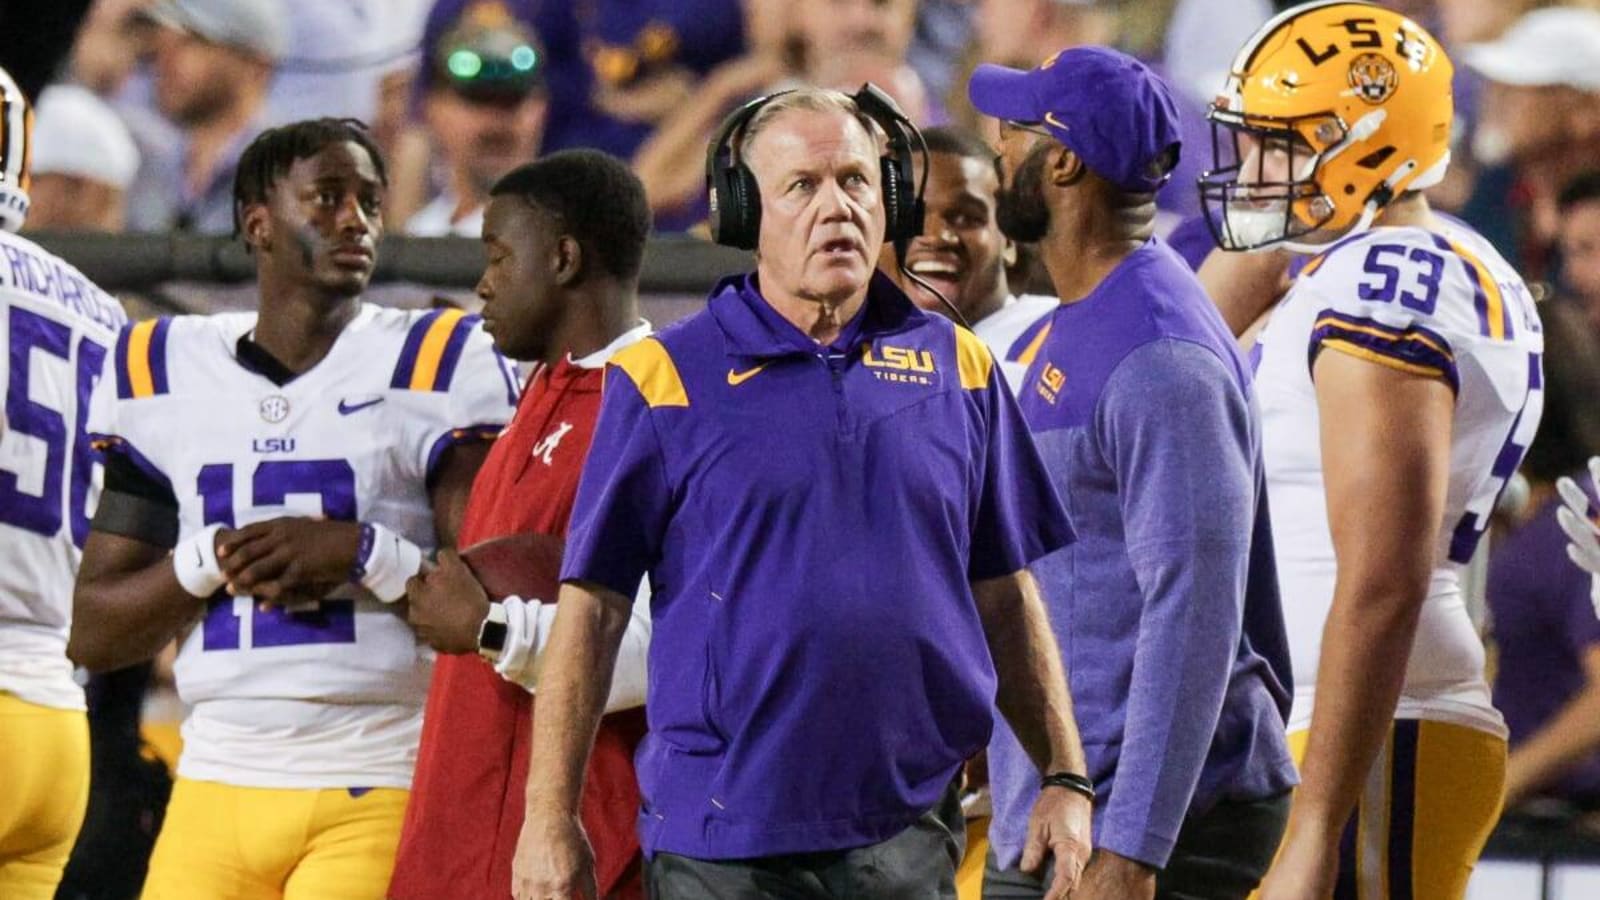 Transfer Portal Tracker: Updated LSU Numbers, Offers Handed Out